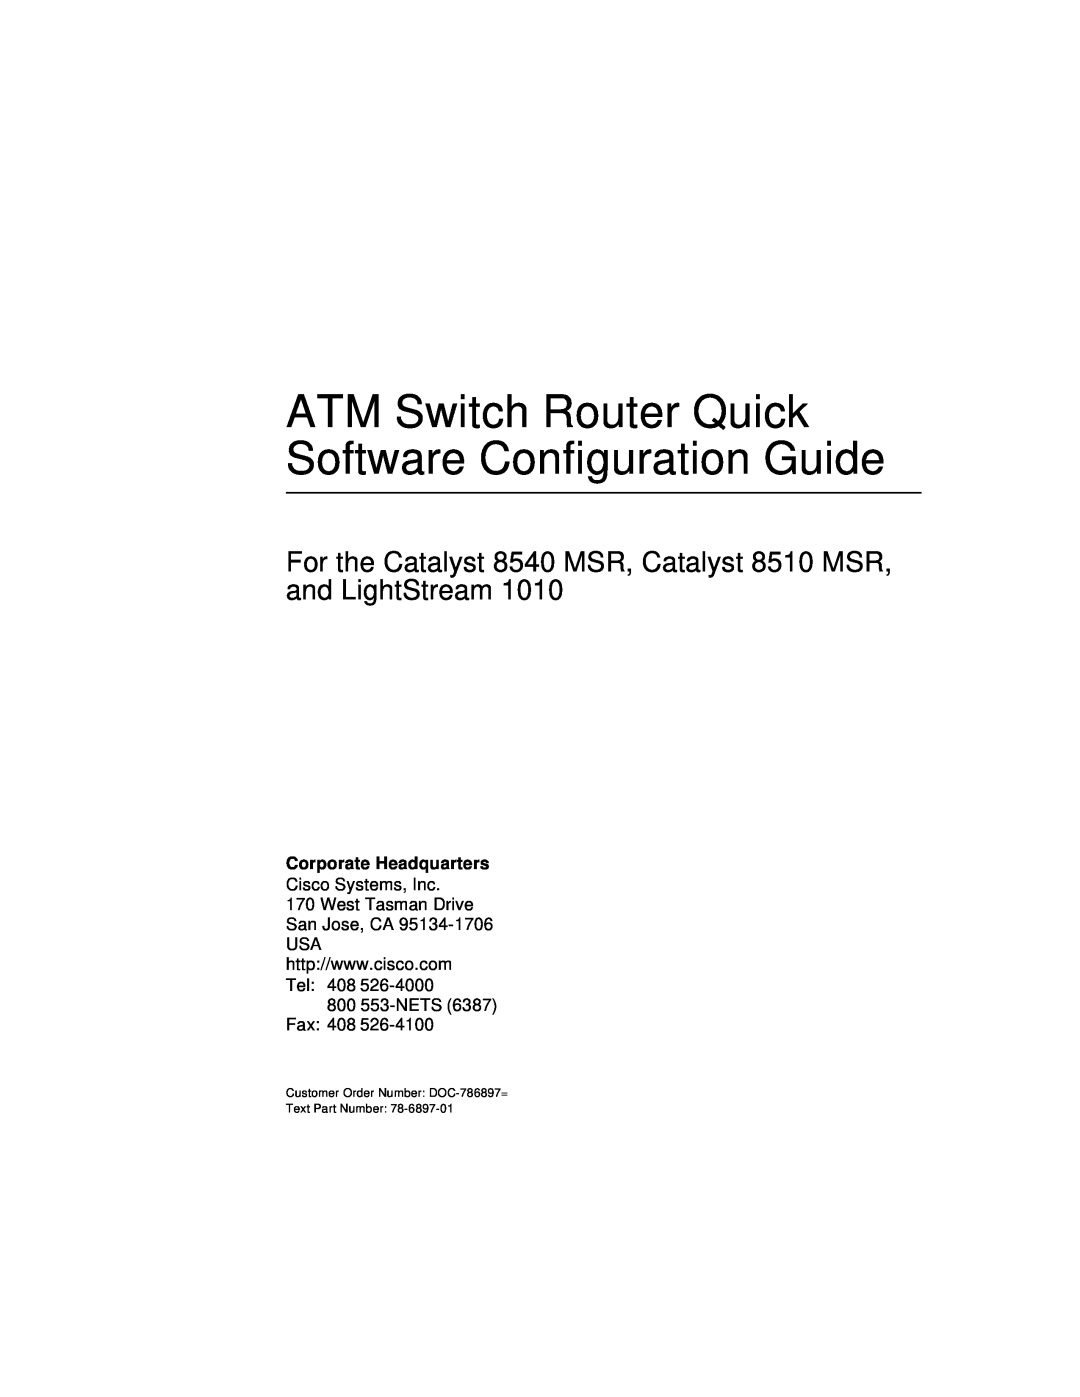 Cisco Systems 78-6897-01 manual ATM Switch Router Quick Software Configuration Guide, Corporate Headquarters 